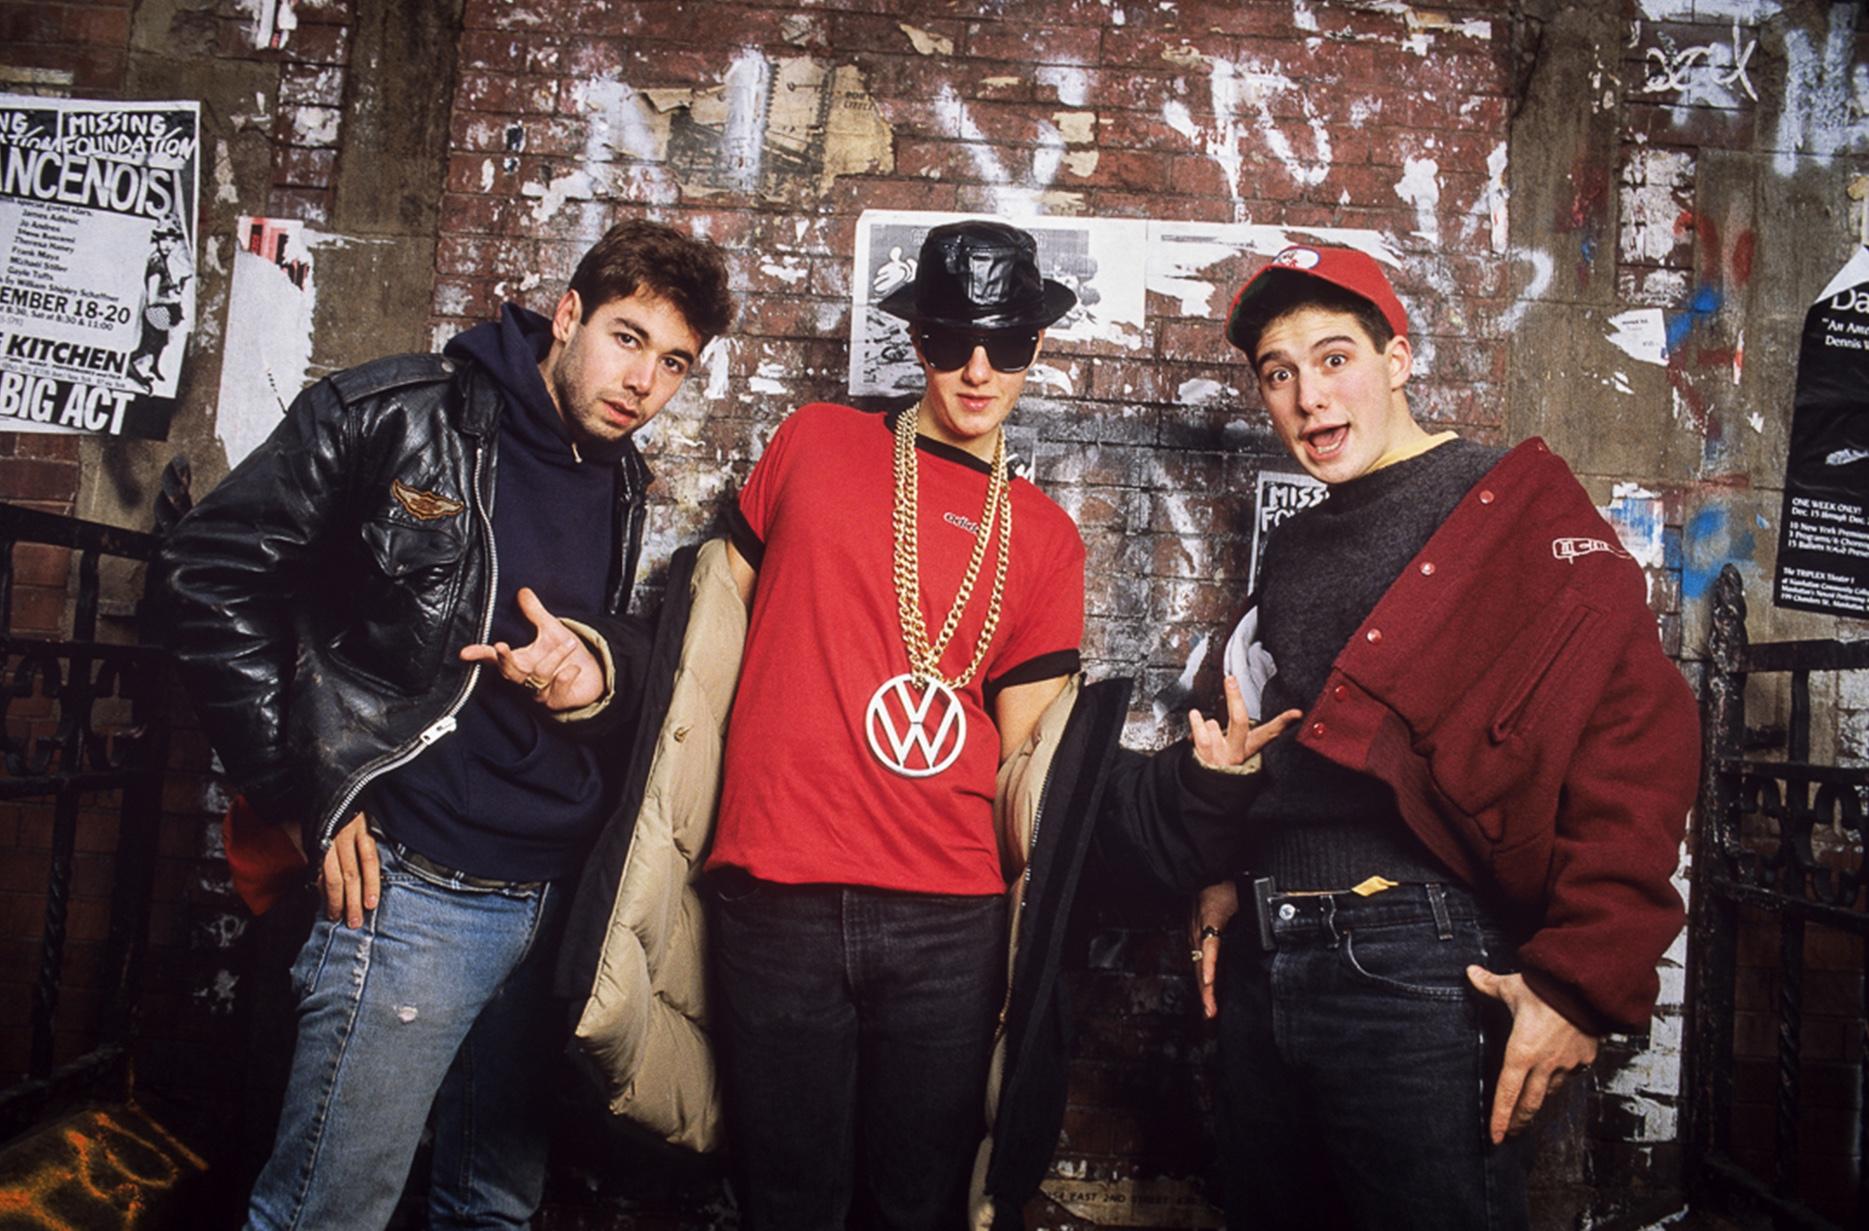 Signed limited edition print of The Beastie Boys taken in 1987 by Lynn Goldsmith



Signed limited edition #5/20 - signed, numbered and titled by Lynn Goldsmith